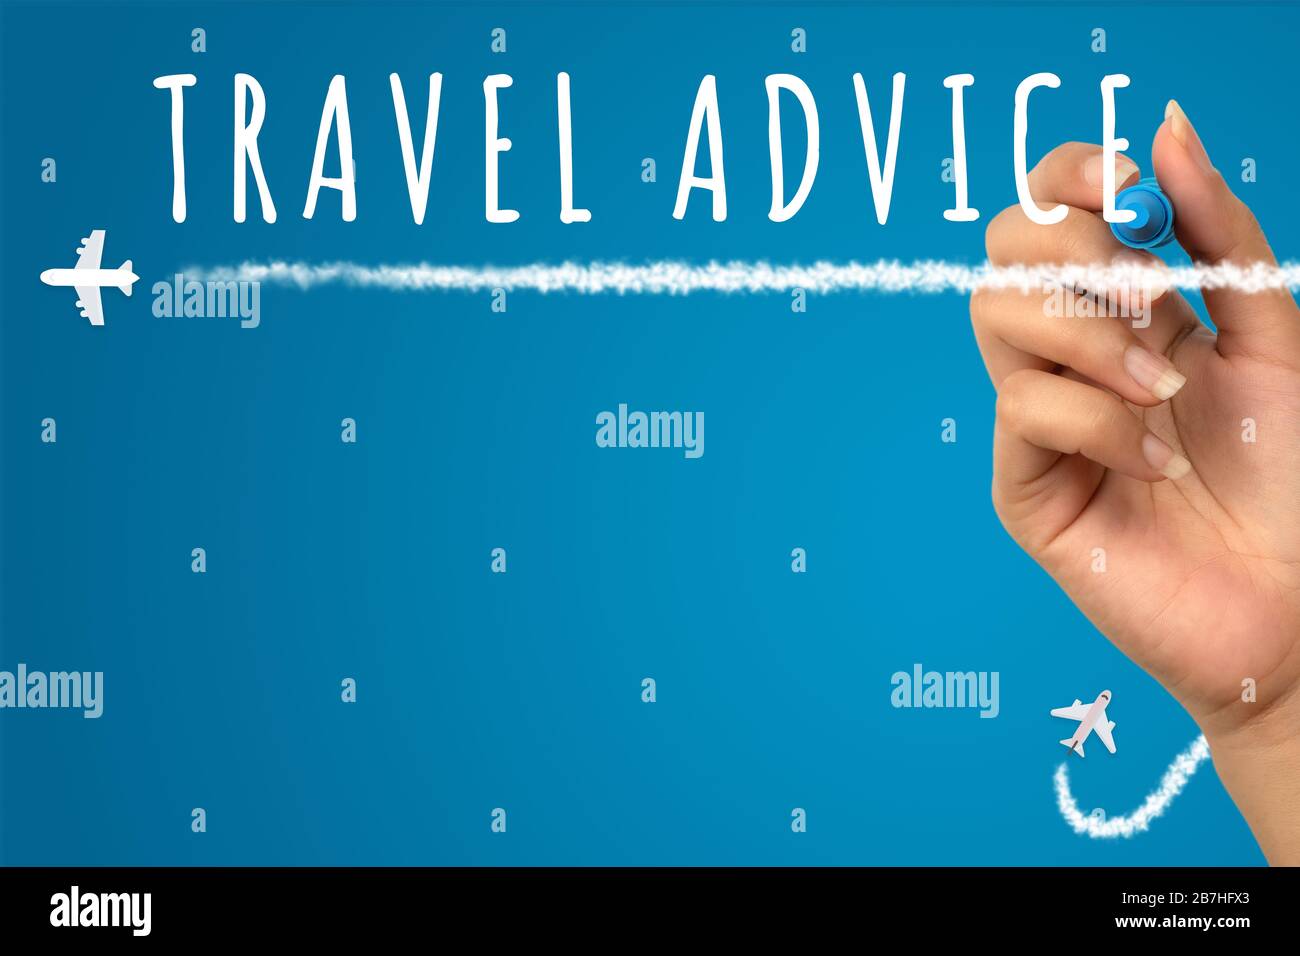 Latest flight travel advice, handwritten sign with plane icons and space for copy - Trip journey advisory information for delays and transport cancellations - update, communication and advise concept Stock Photo